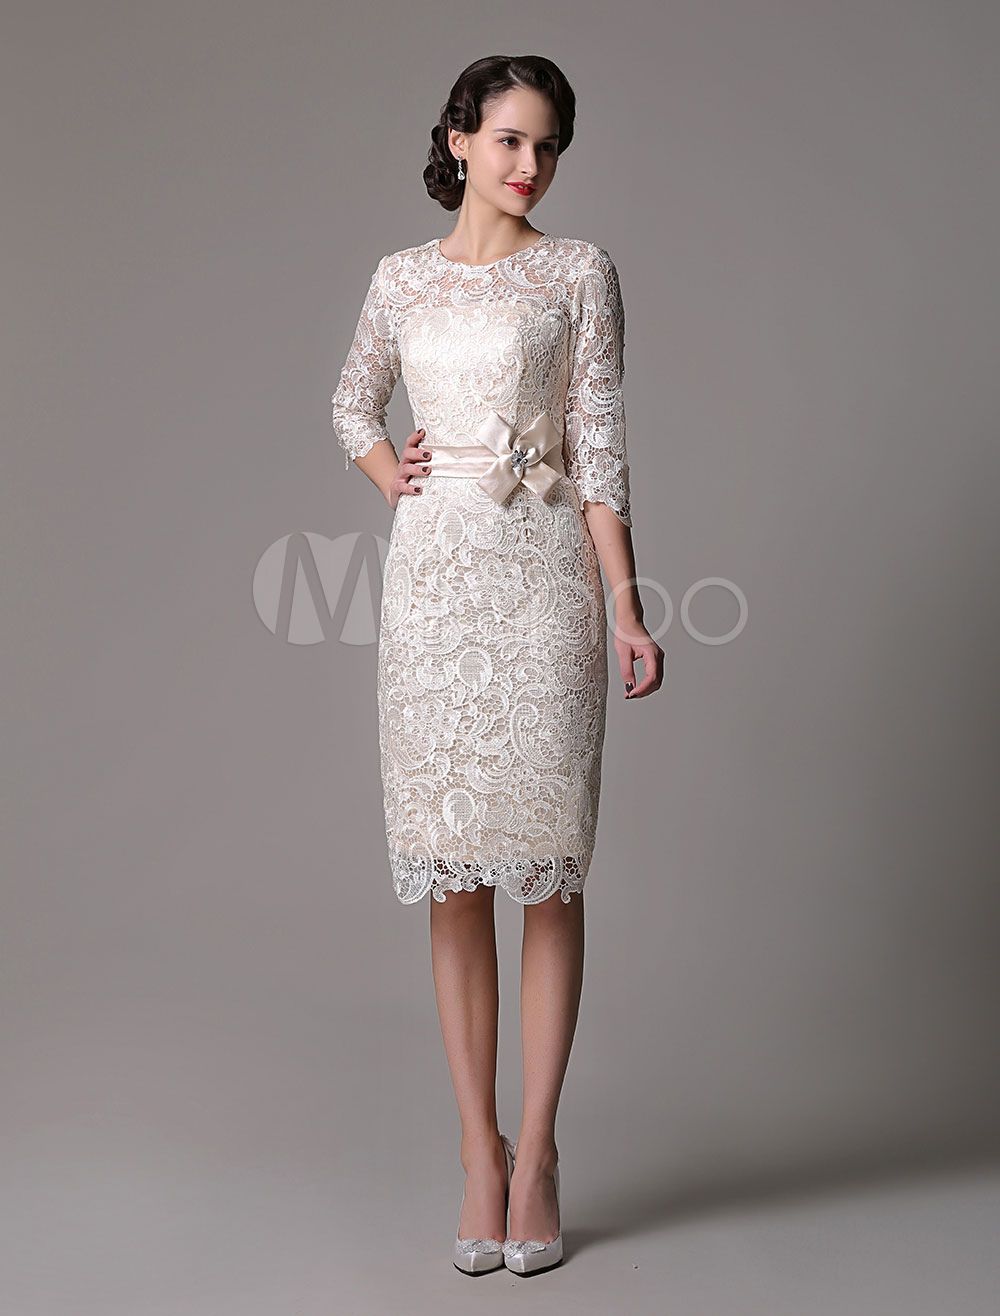 Wedding Guest Dresses Lace Sheath Champagne Cocktail Dress Knee